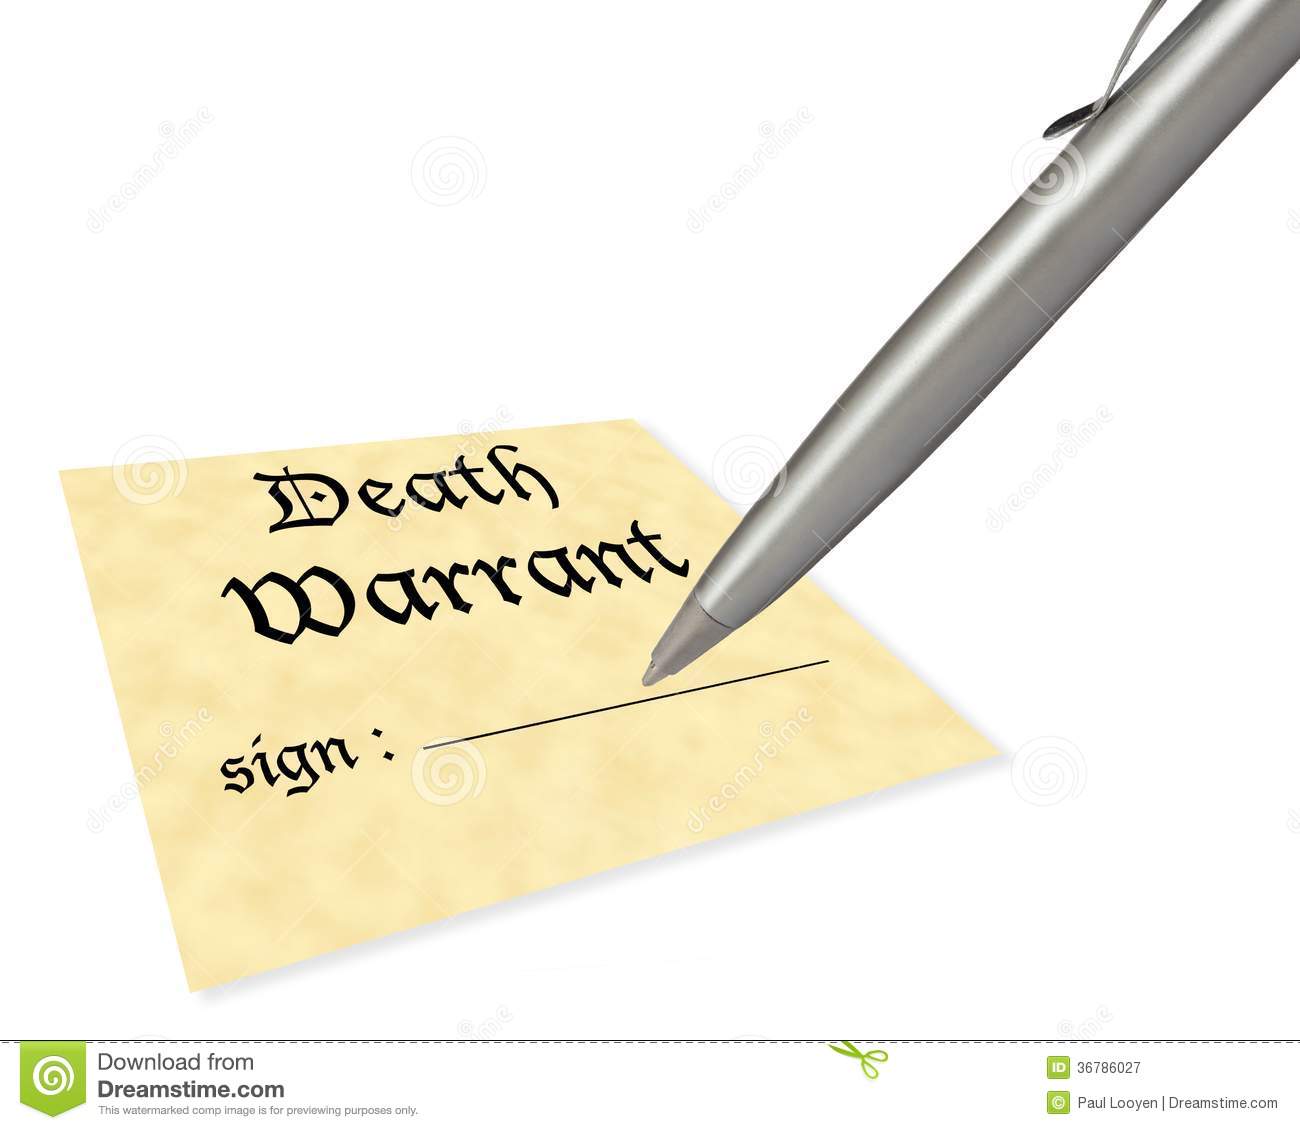 Death clipart blank. Warrant panda free images